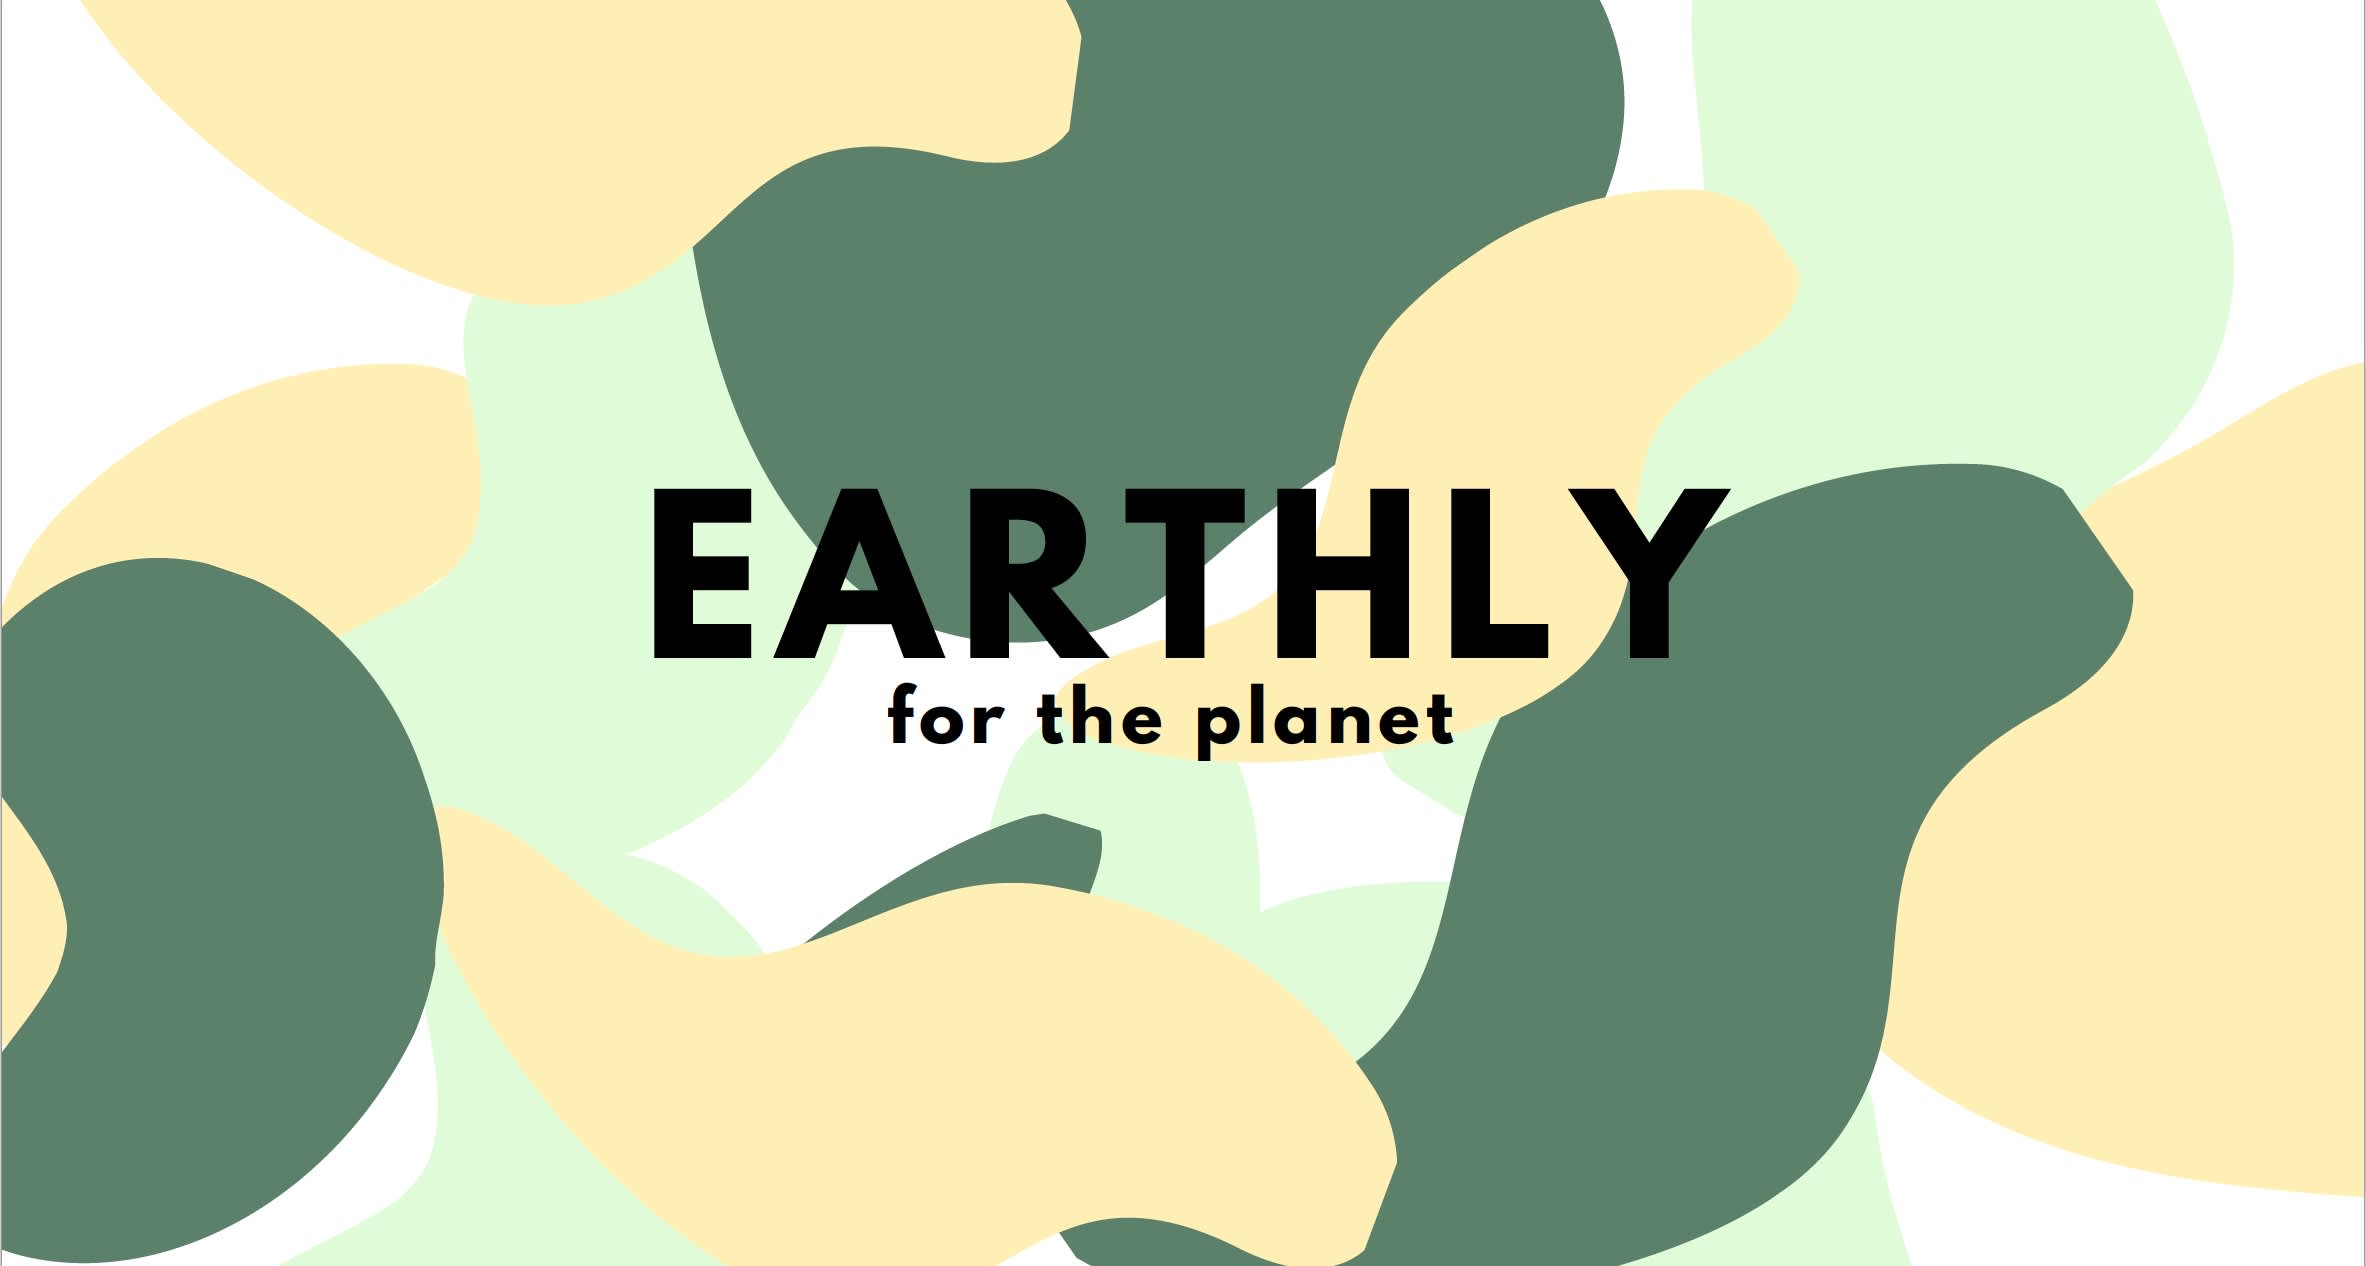 Earthly for the planet